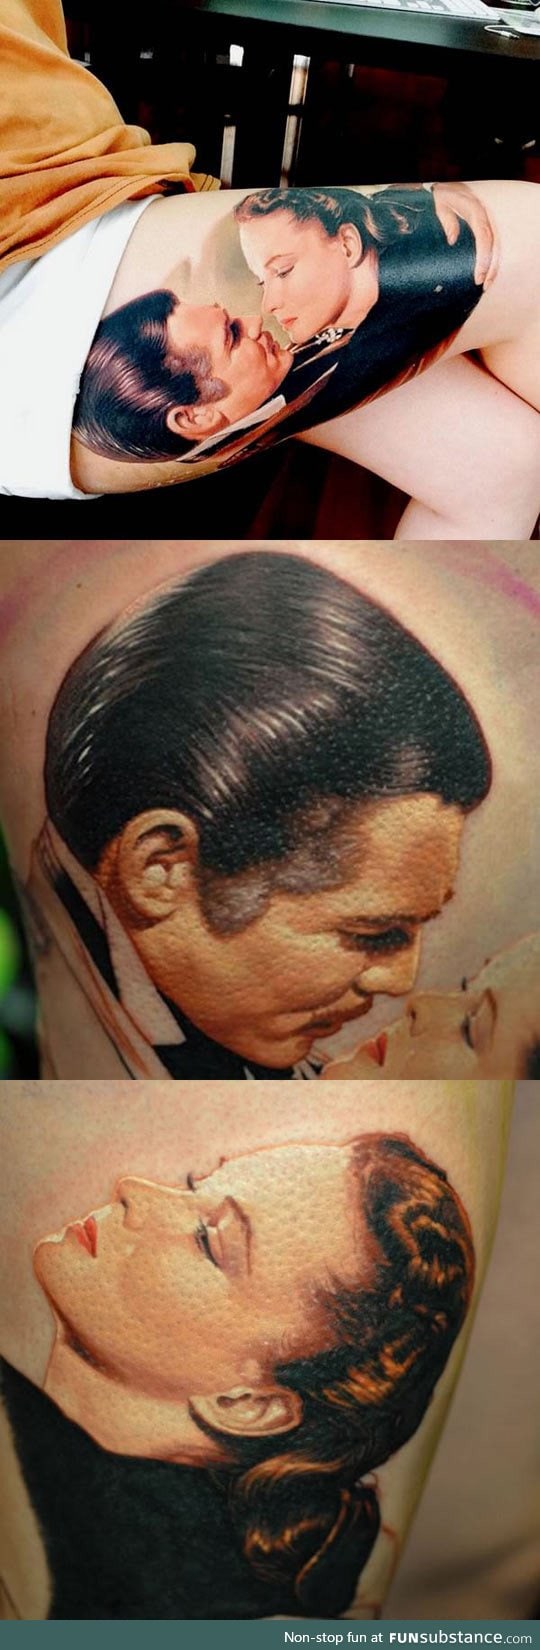 Now this is a mind-blowing tattoo